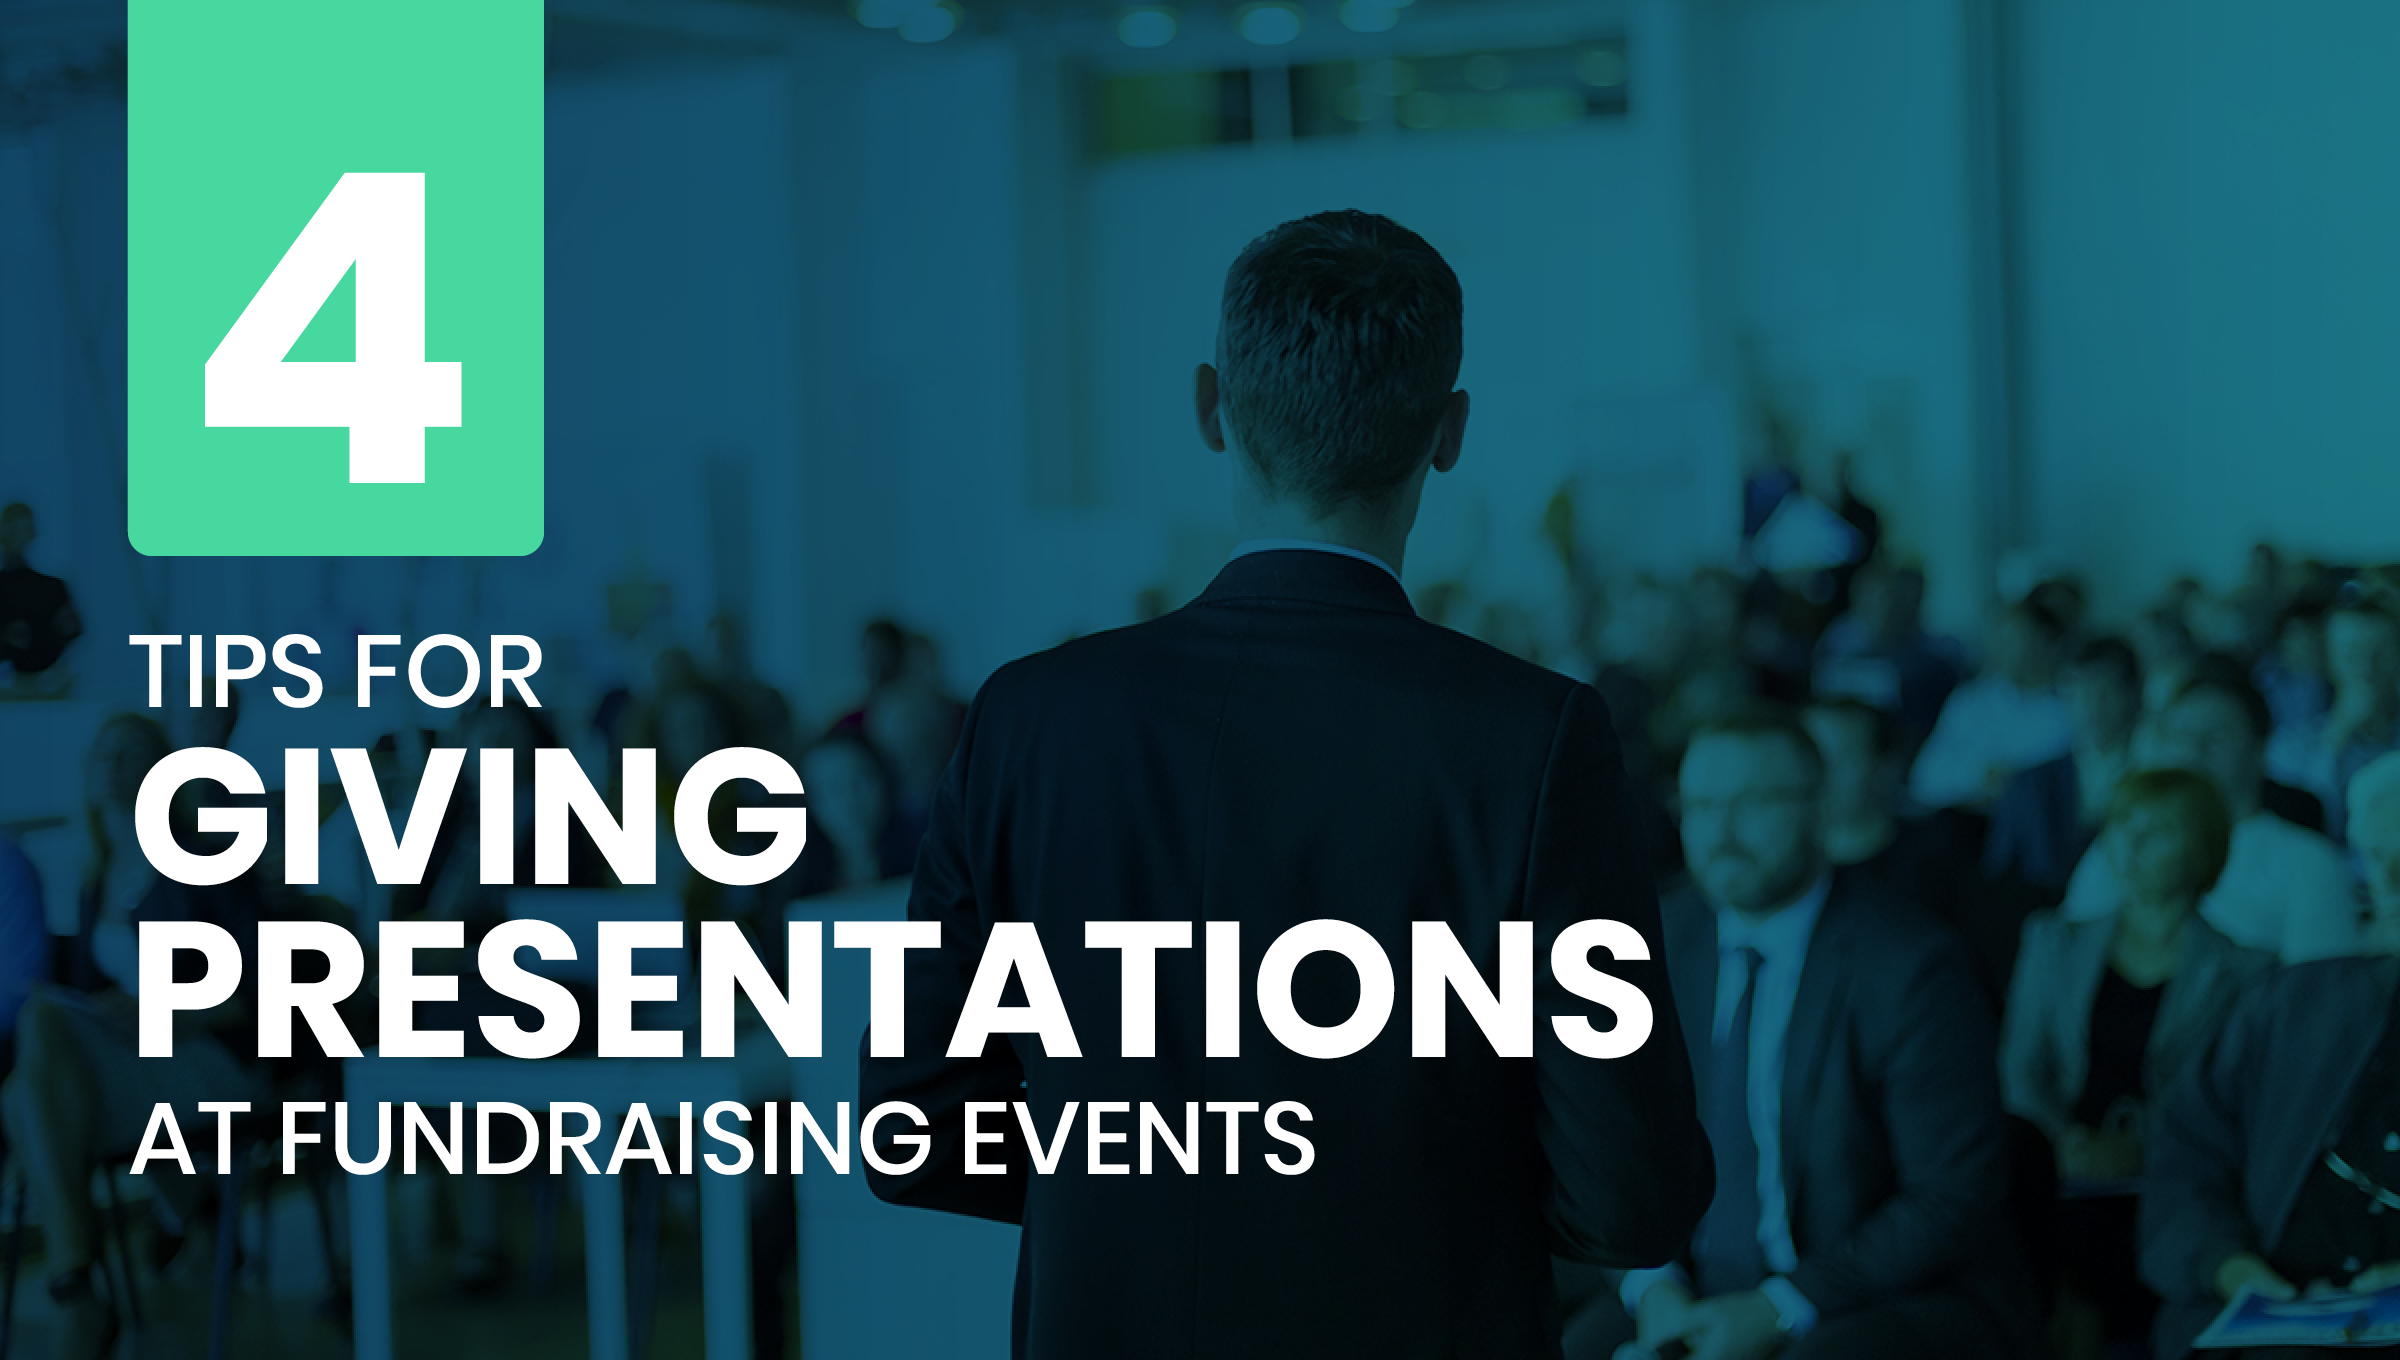 4 Tips for Giving Presentations at Fundraising Events